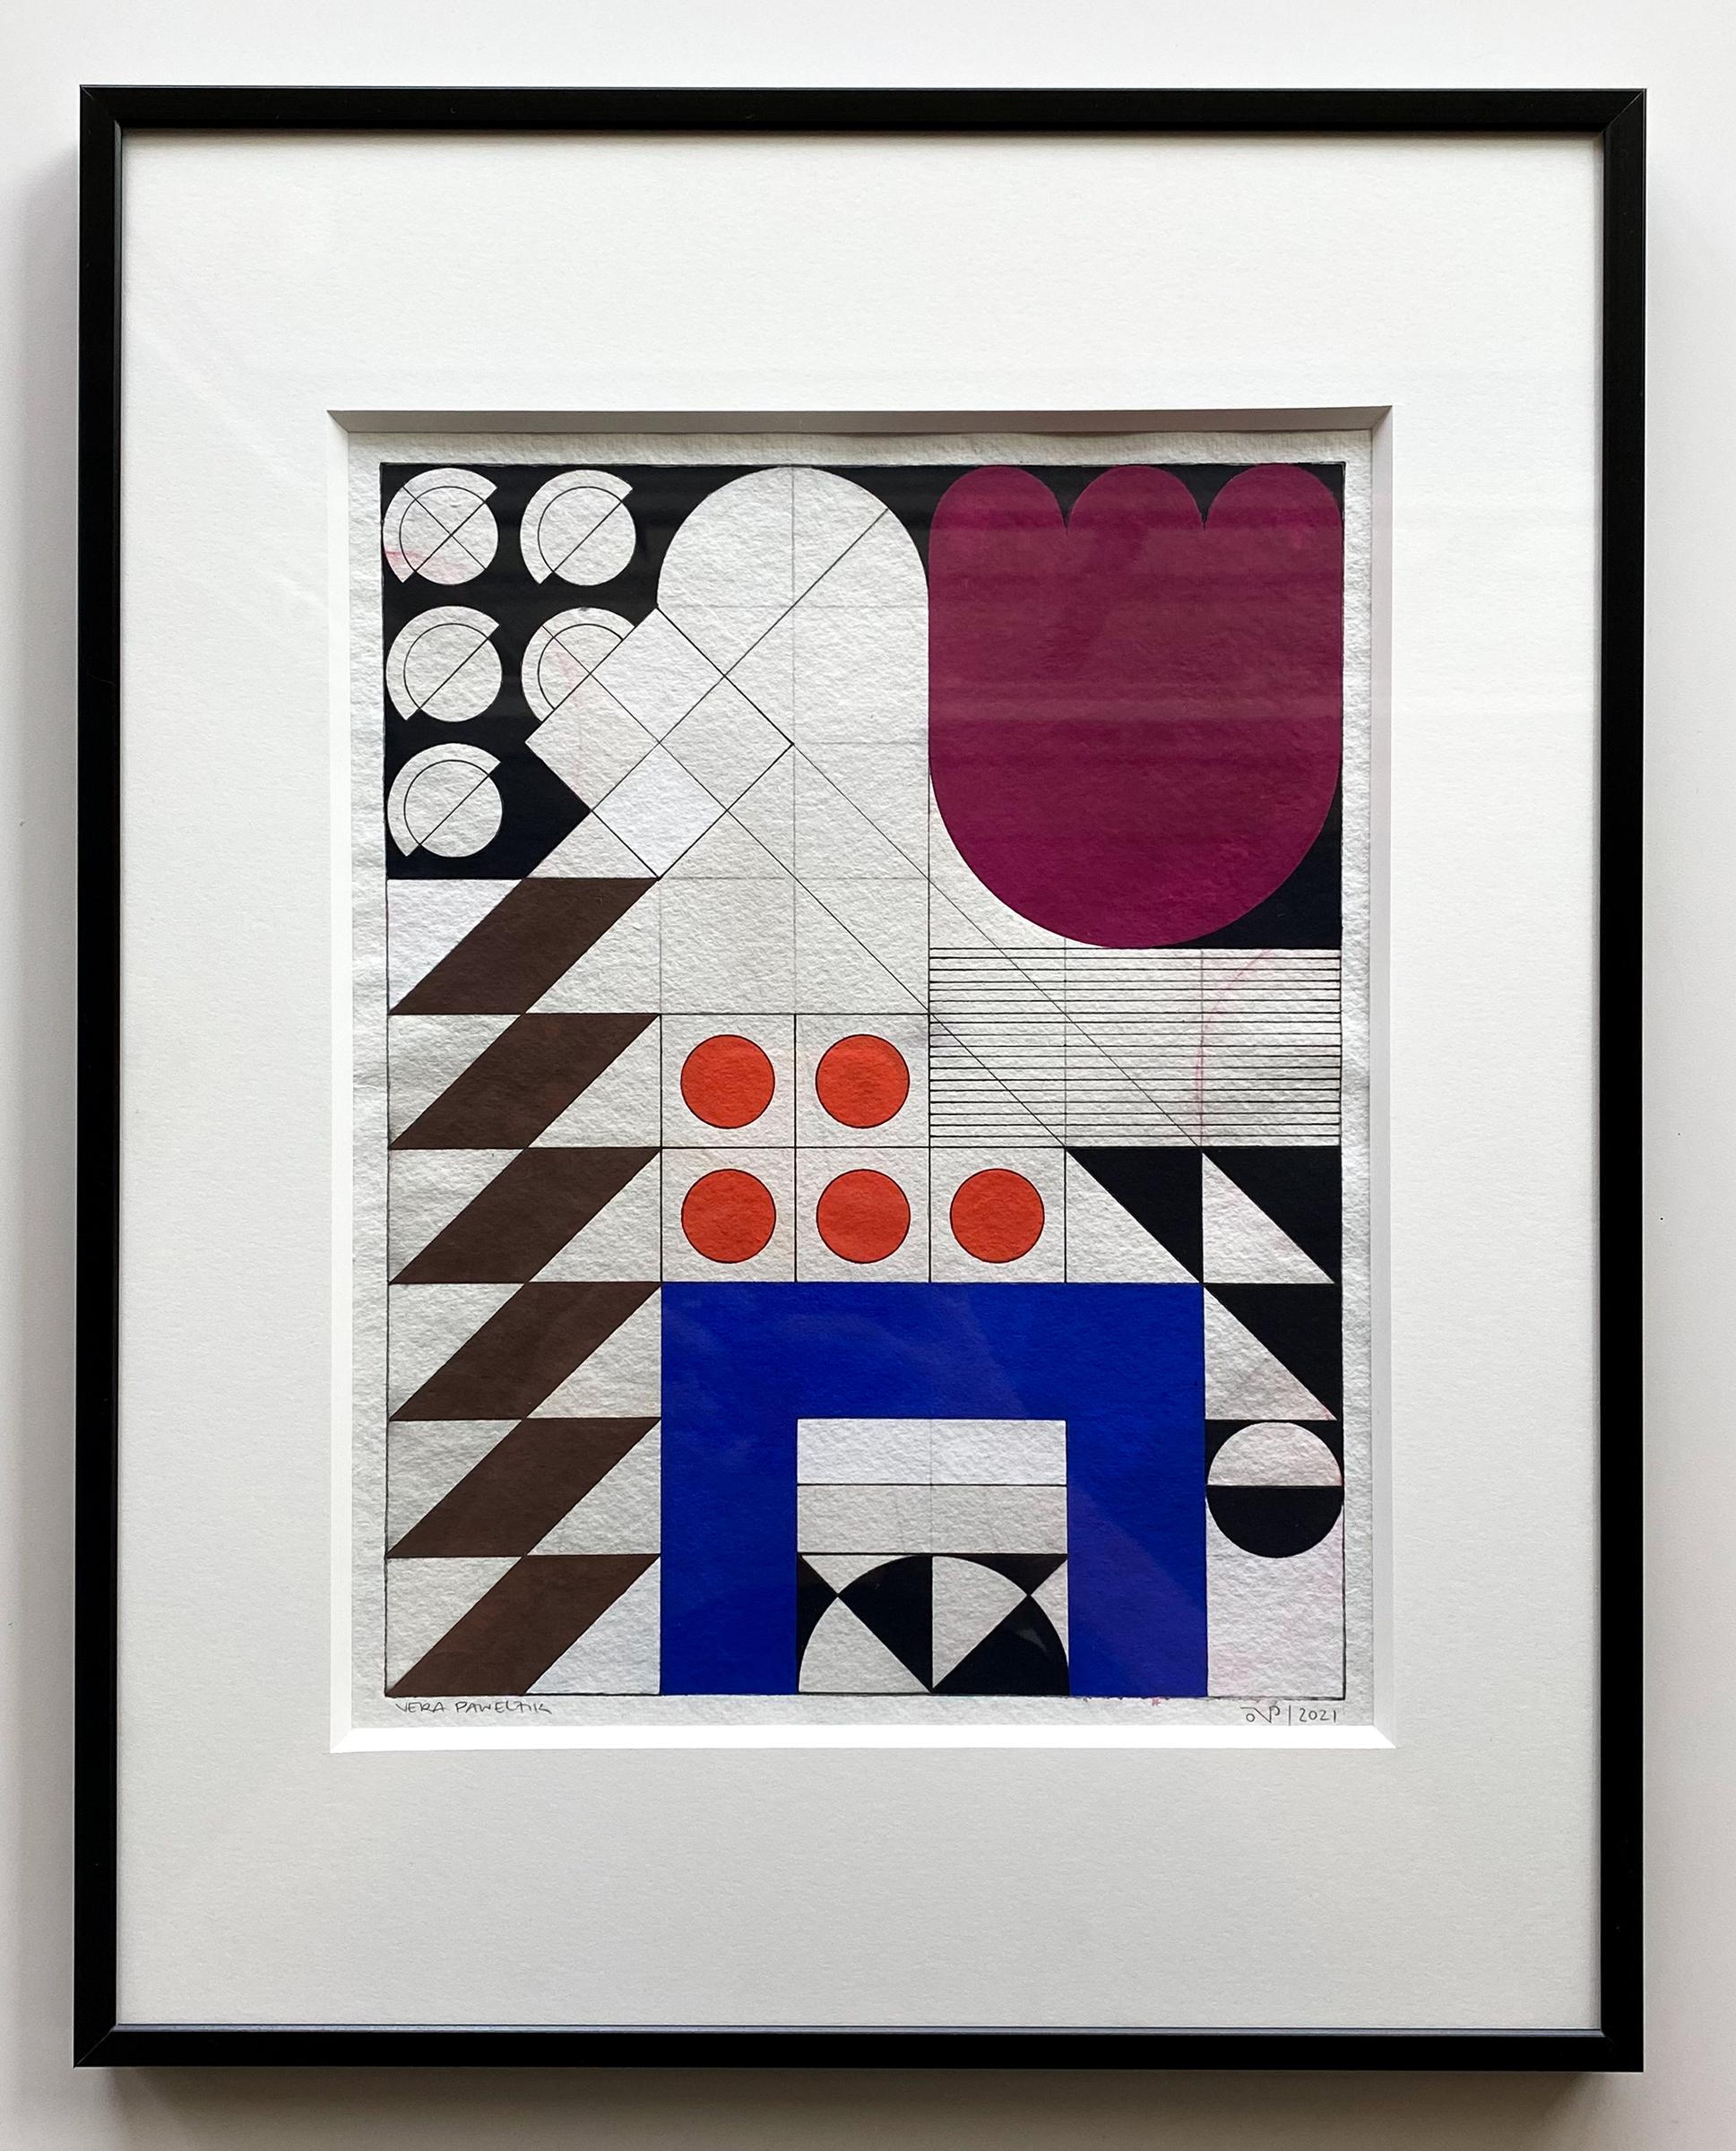 '63 Squares Play 1' - Contemporary Constructivism - Abstract - Josef Albers - Painting by Vera Pawelzik